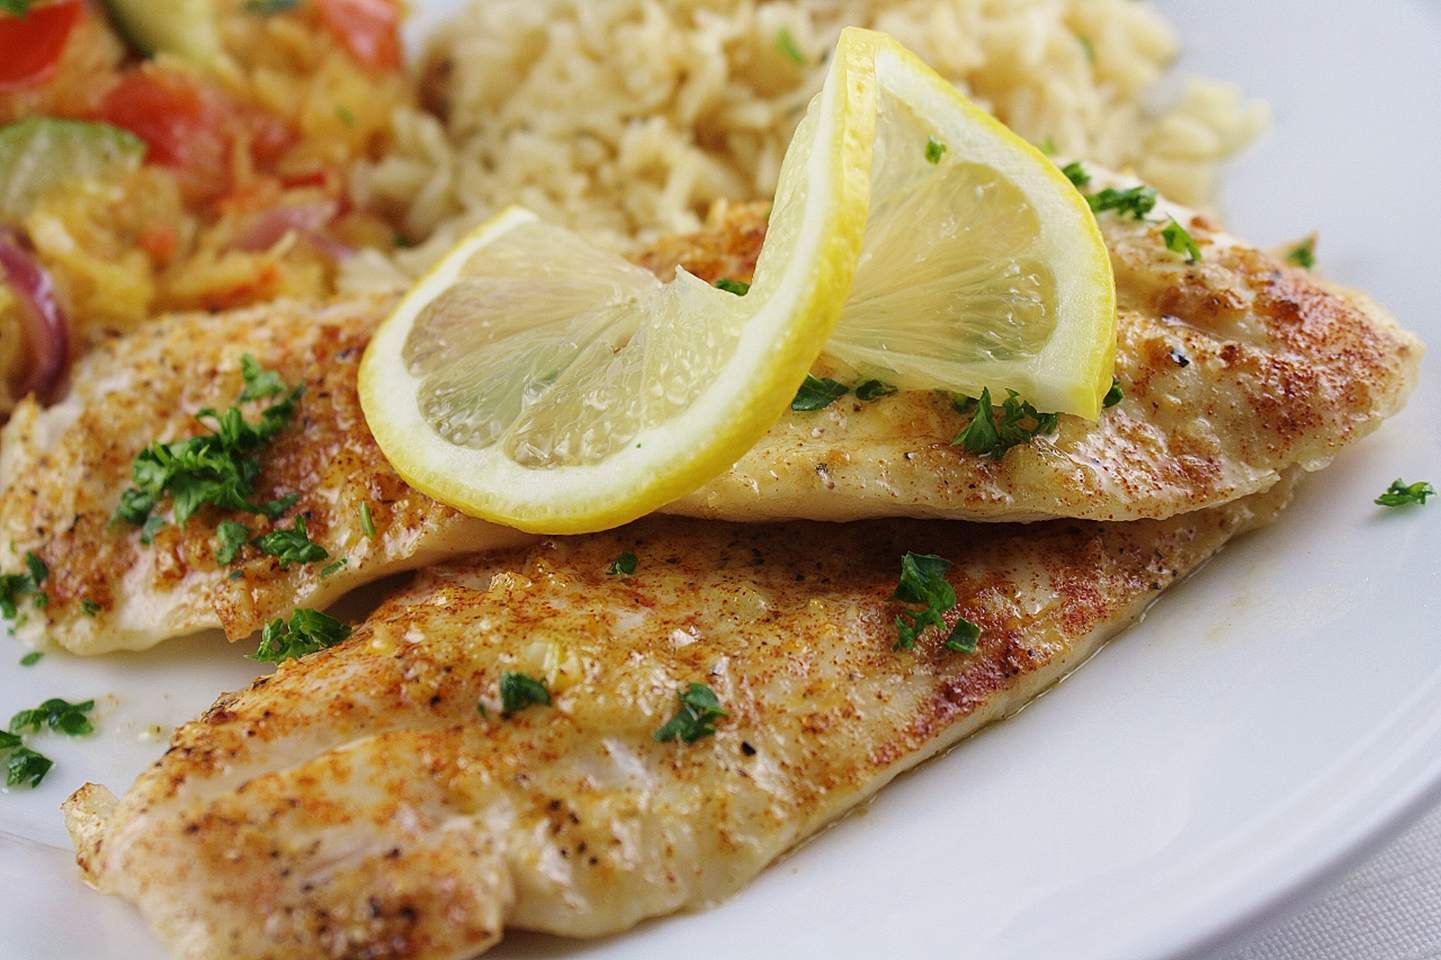 <p>Tilapia fillets are baked in a simple lemon juice and butter sauce. "My husband and I love shrimp scampi," says JasnsWif. "Since tilapia is usually cheaper than shrimp at the store, I concocted this easy recipe to enjoy the flavor of scampi at the price of tilapia!"</p>
                          